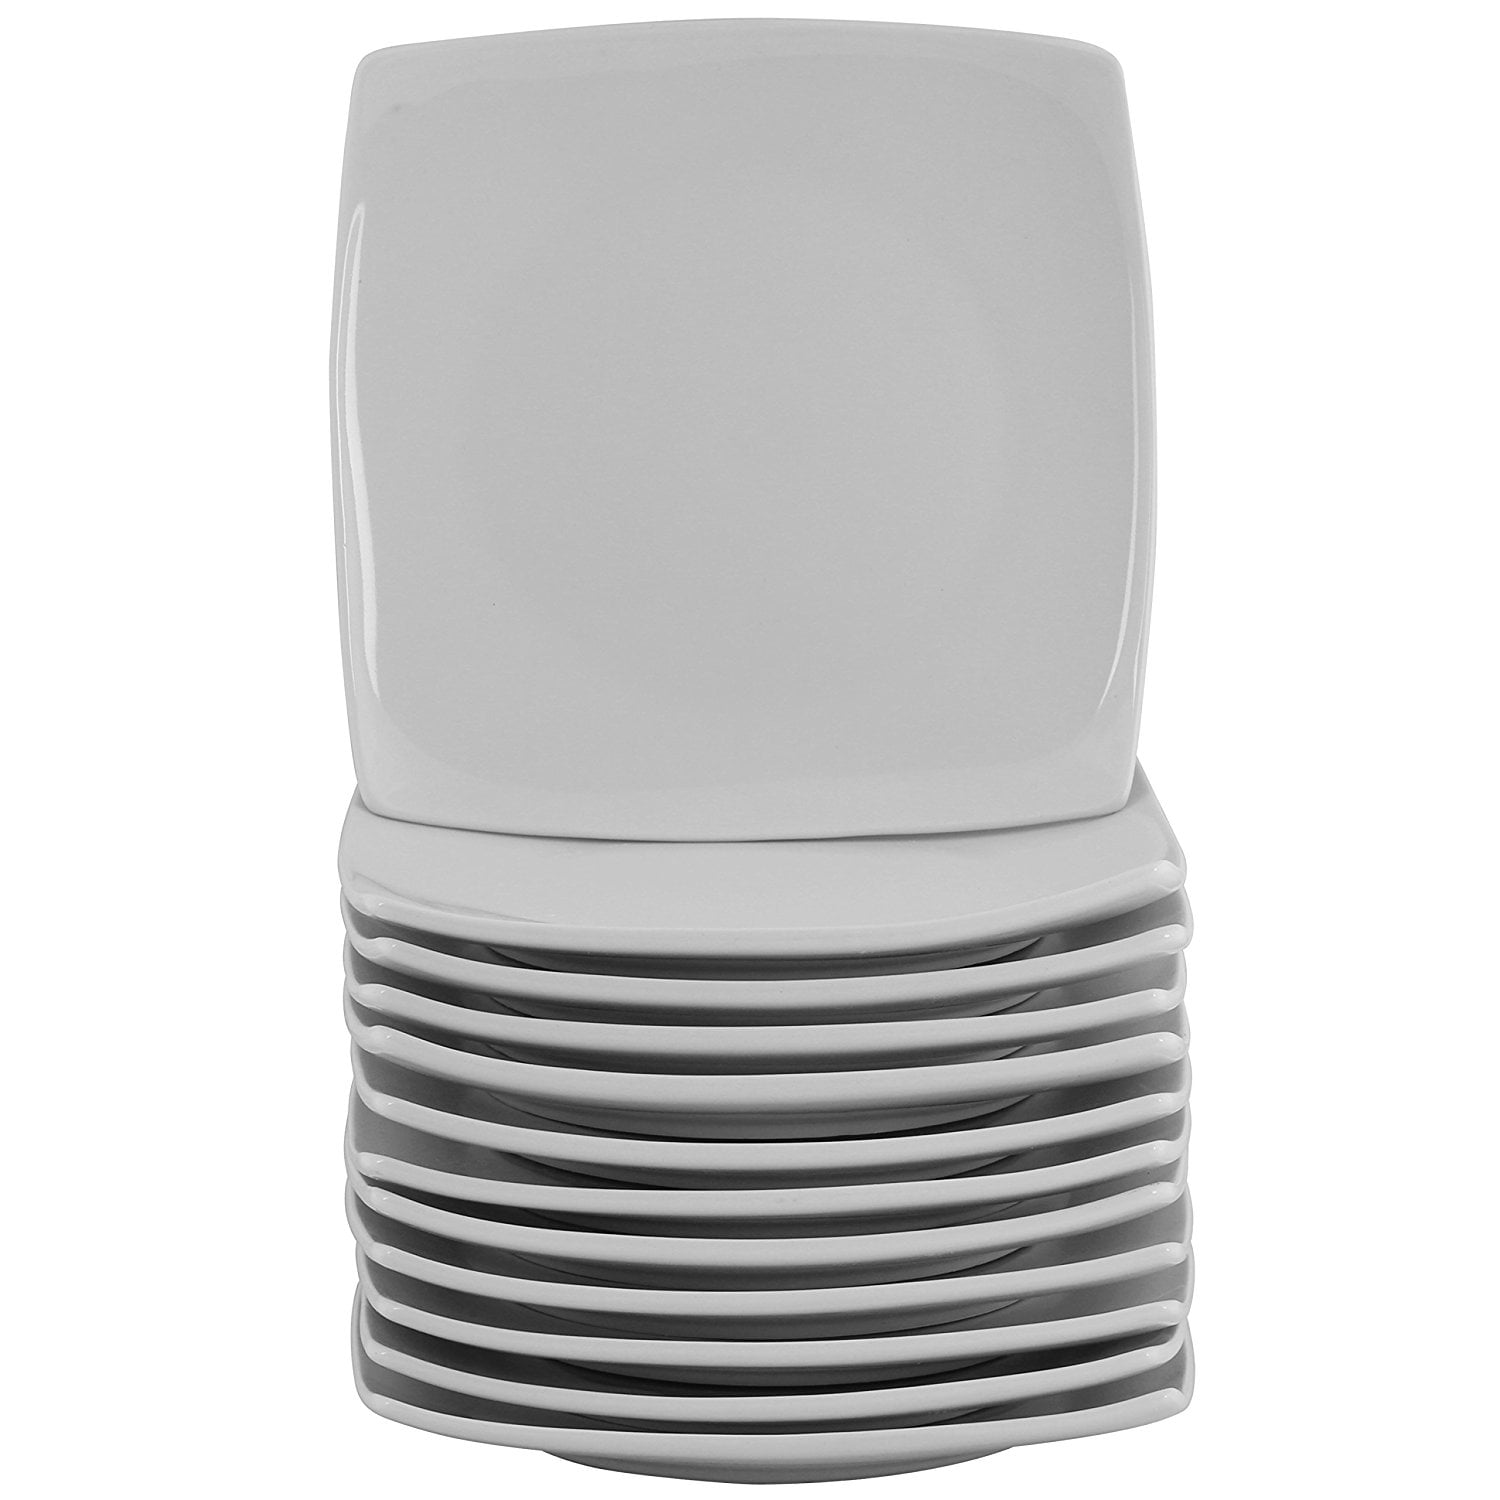 Party Packs Coupe Square Appetizer Plates, Set of 12, White, Care